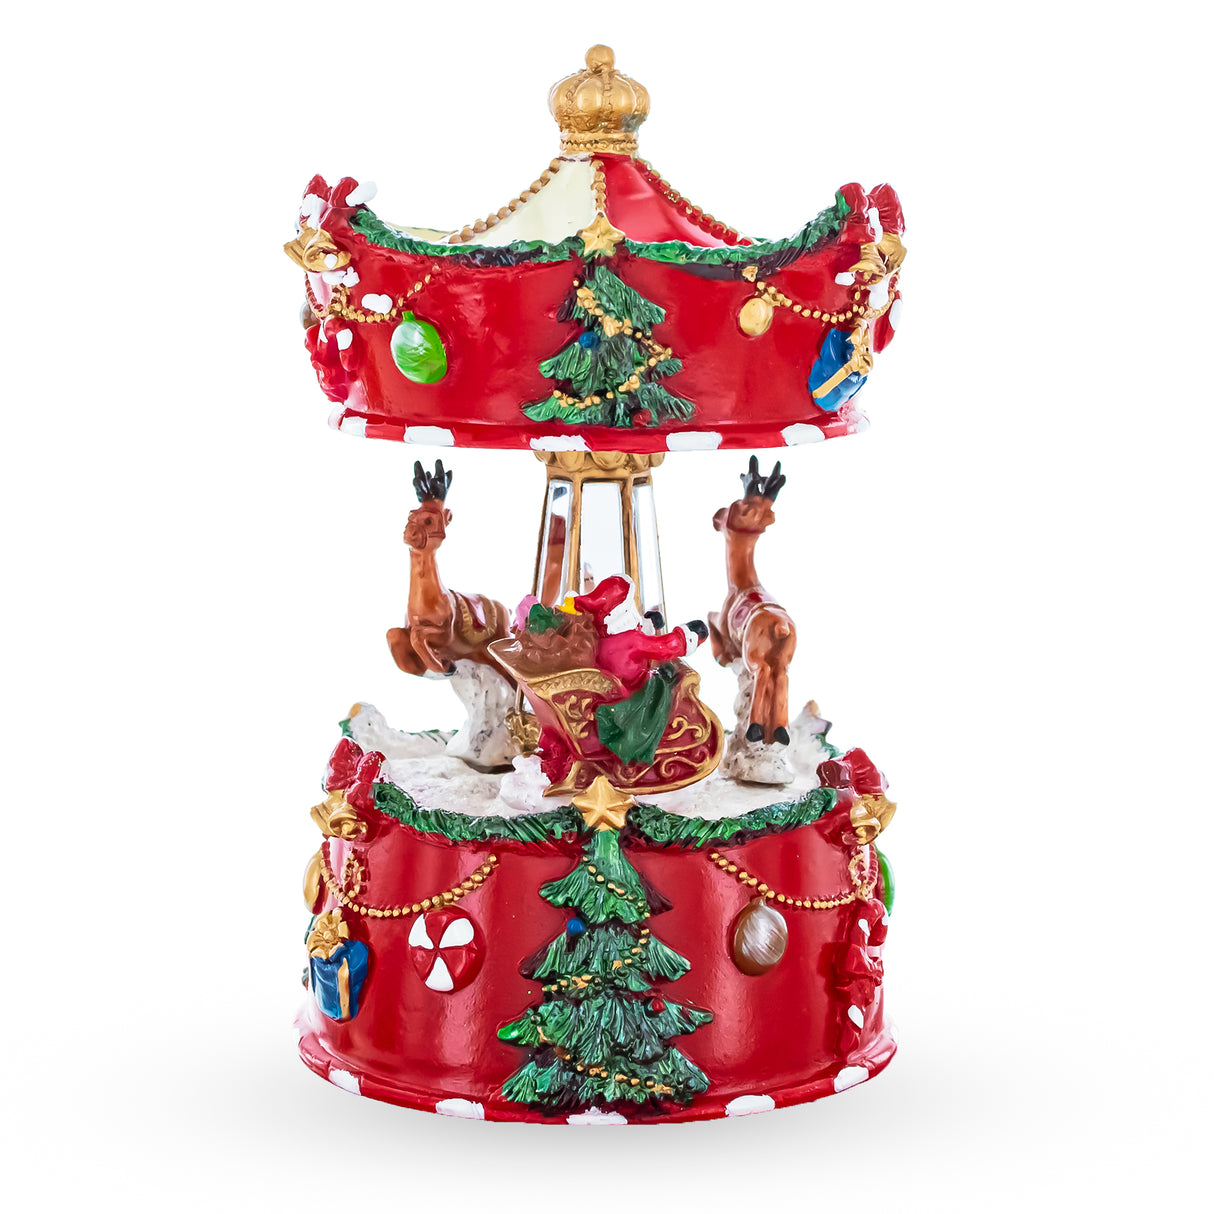 Buy Merry Carousel Ride: Spinning Musical Christmas Figurine with Santa ...